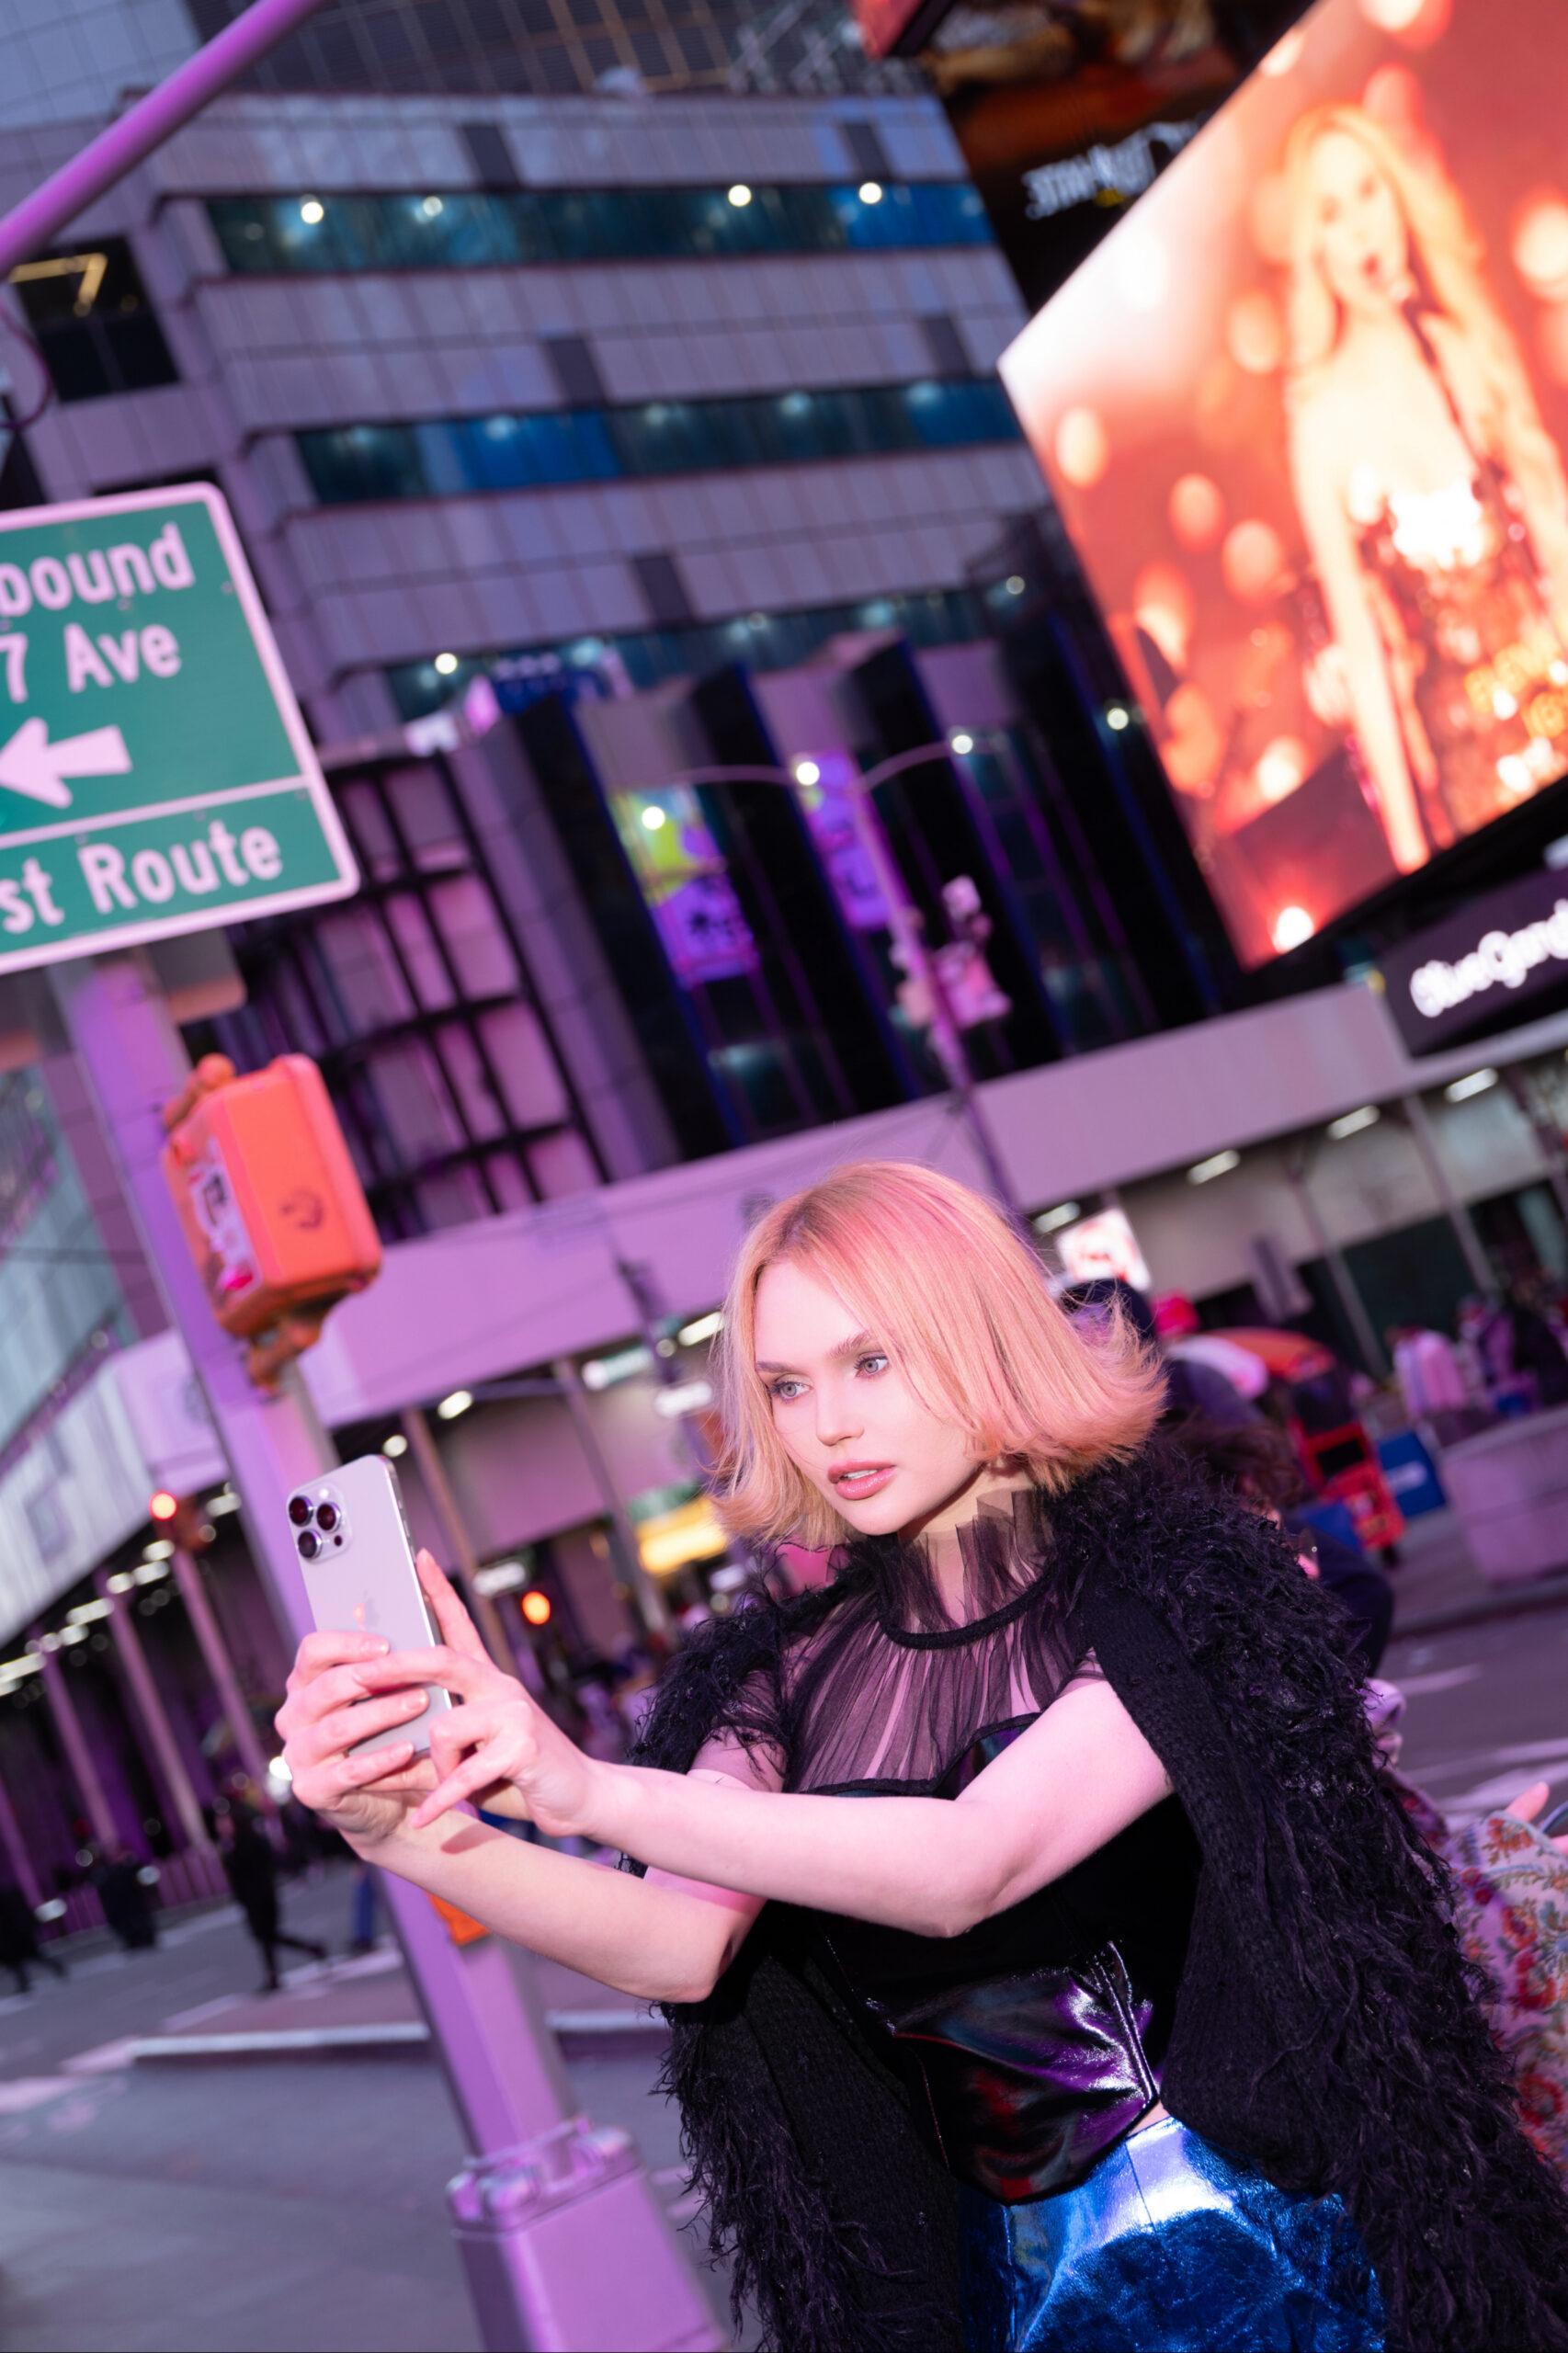 International Star Elena Matei Takes Over NY's Times Square For 'Rock It' Release [PHOTOS]